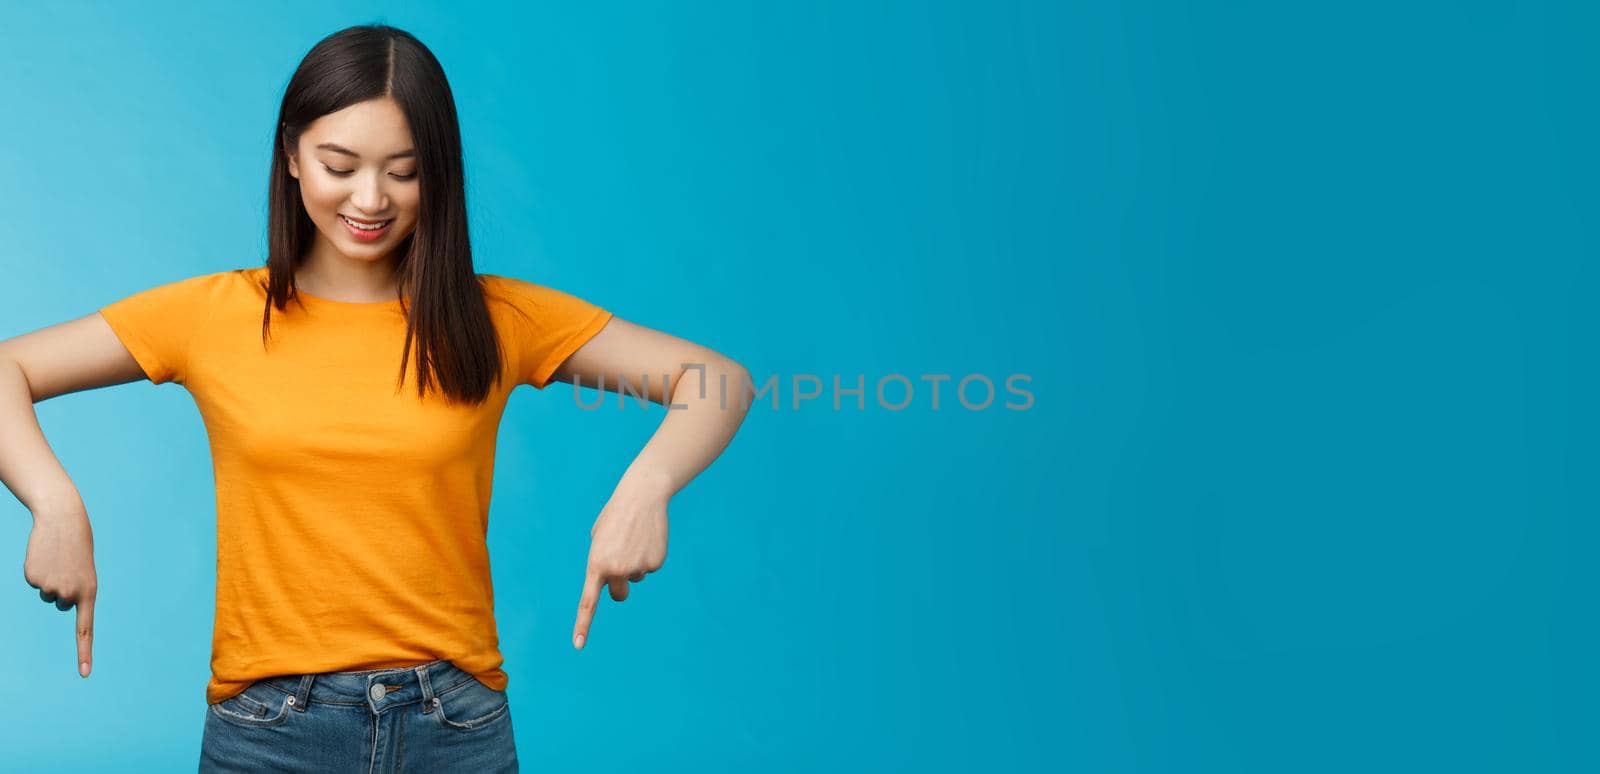 Cute tender feminine asian girl dark haircut look pointing down contemplating interesting product, stare curiously smiling amused, express enthusiasm interest try-out cool thing, blue background.